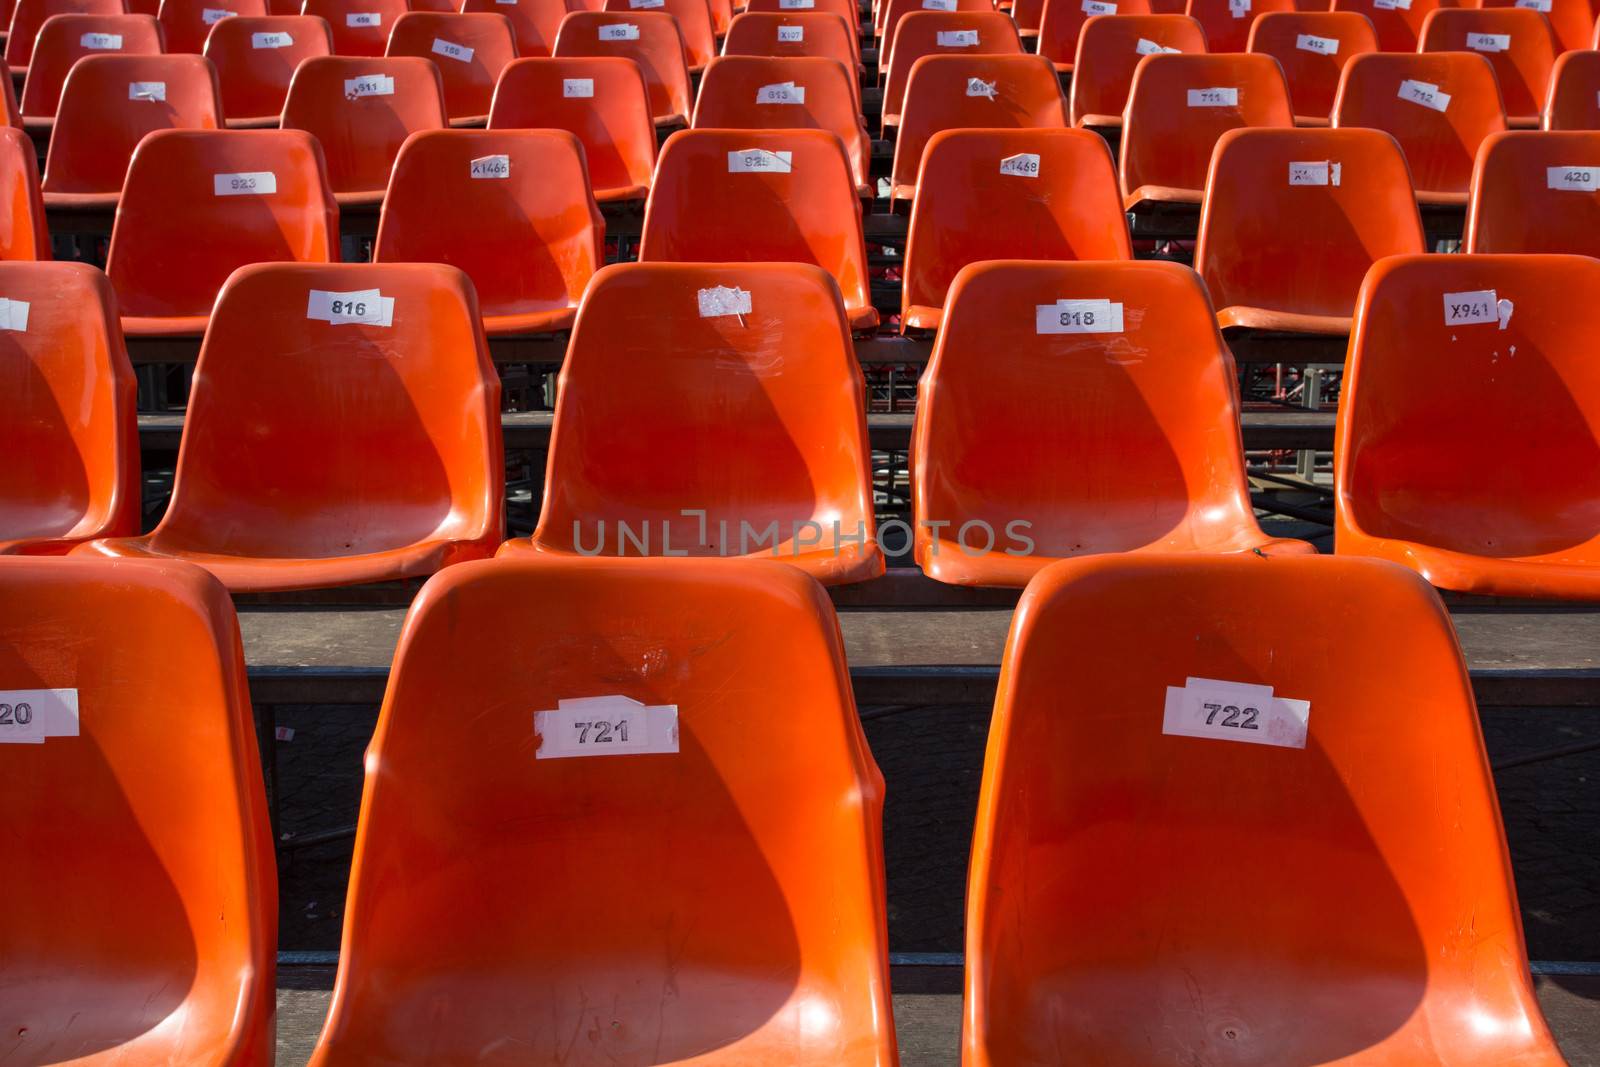 Orange Seats with numbers by watchtheworld